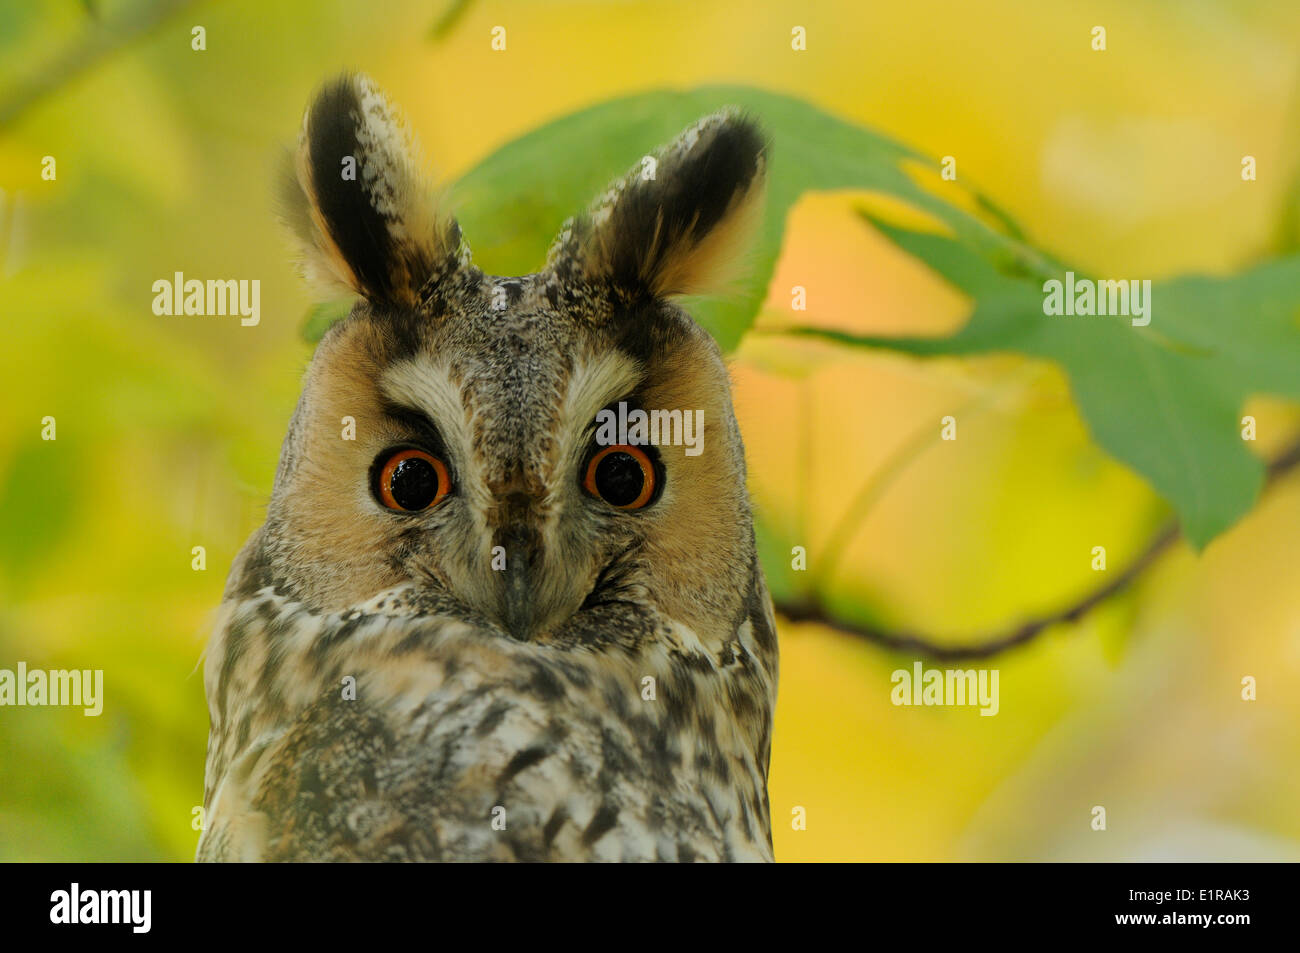 Roosting Long-eared Owl in deciduous tree in autumn colors looking down Stock Photo